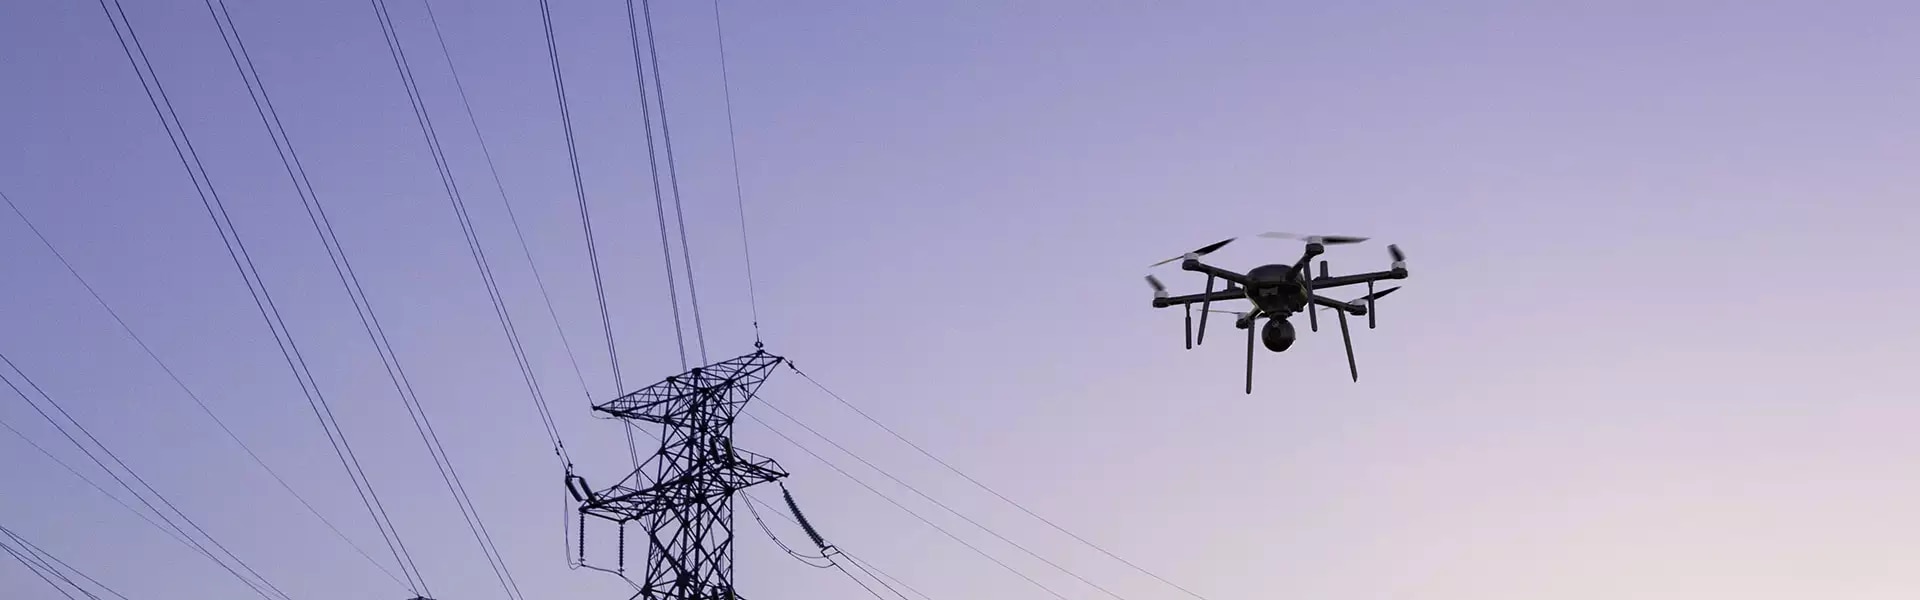 Power grid inspection by Nokia drone